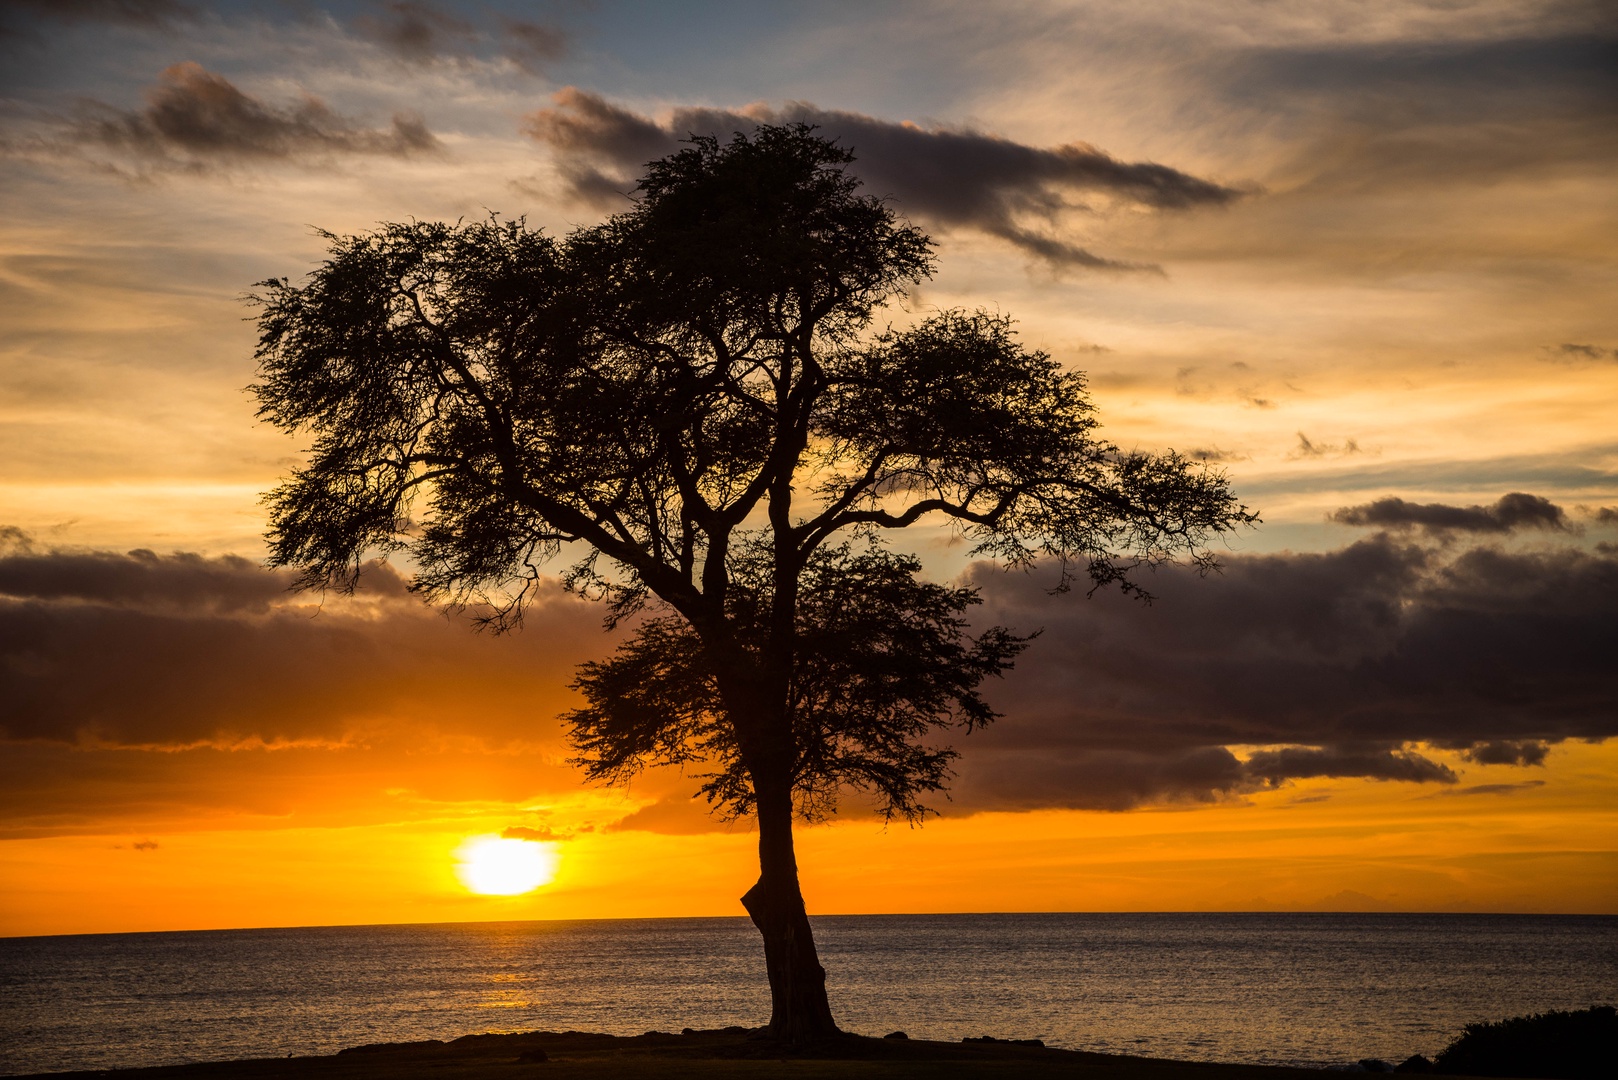 Kapolei Vacation Rentals, Coconut Plantation 1200-4 - Sunsets never dissapoint!